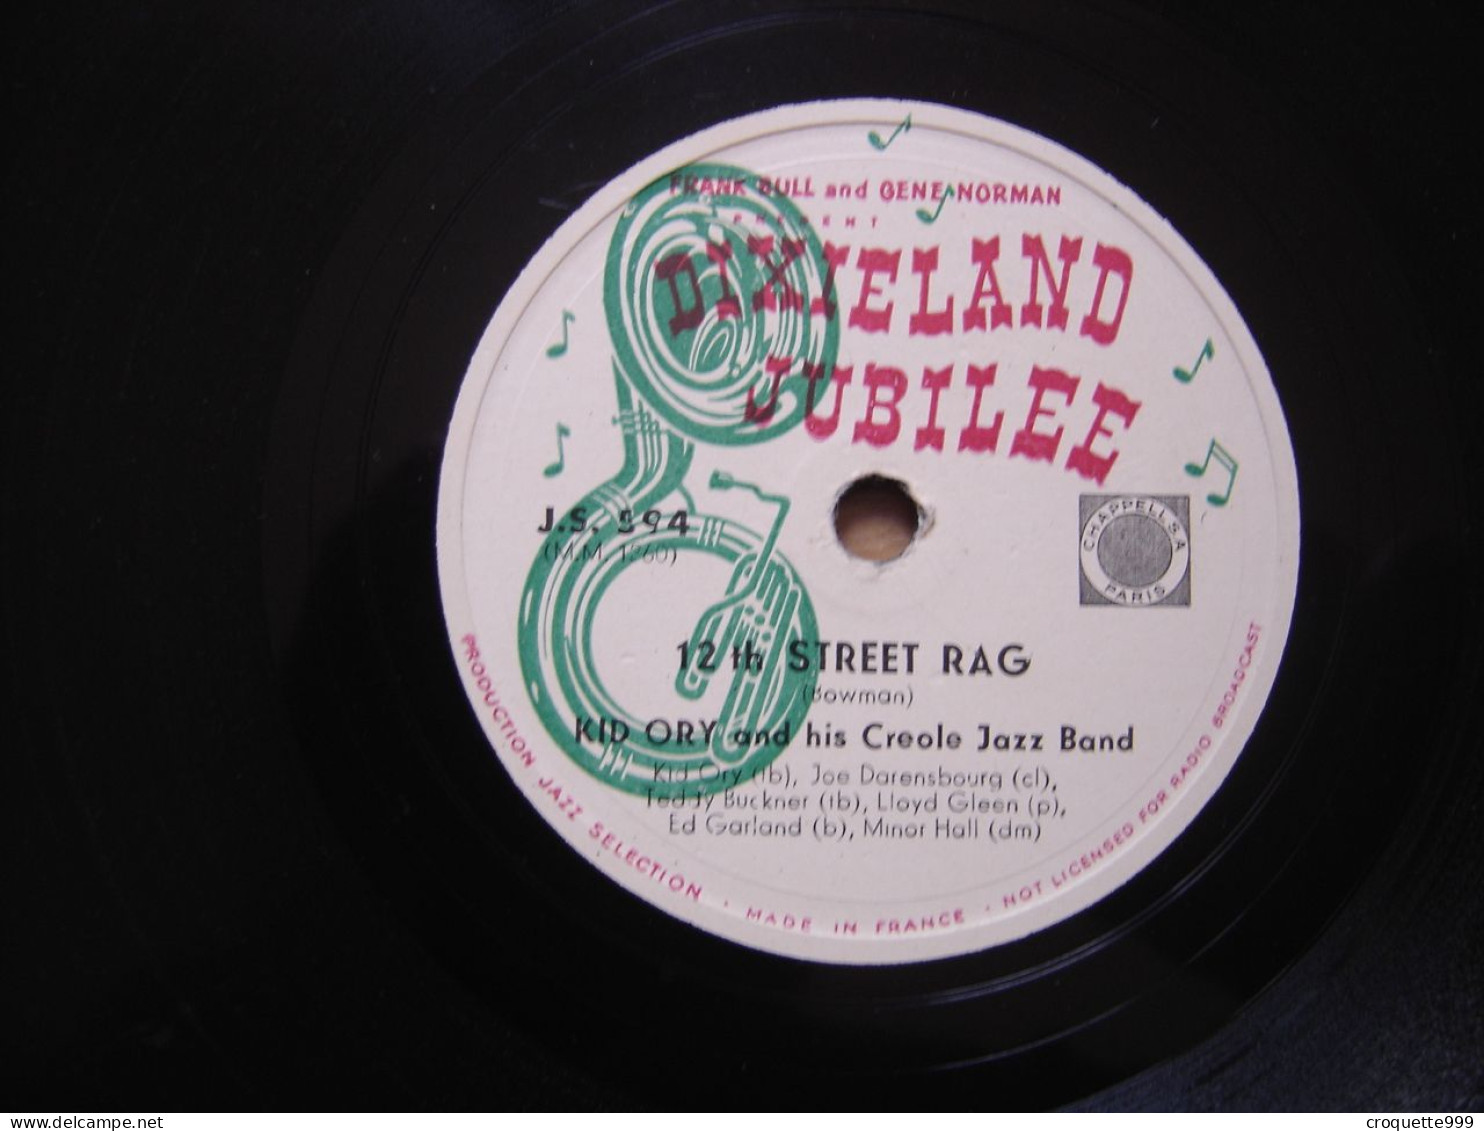 Disque 78 Tours 25 Cm KID ORY And His Creole Jazz Band Dixieland Jubilee J.S. 594 12th STREET RAG SAVOY - 78 Rpm - Schellackplatten